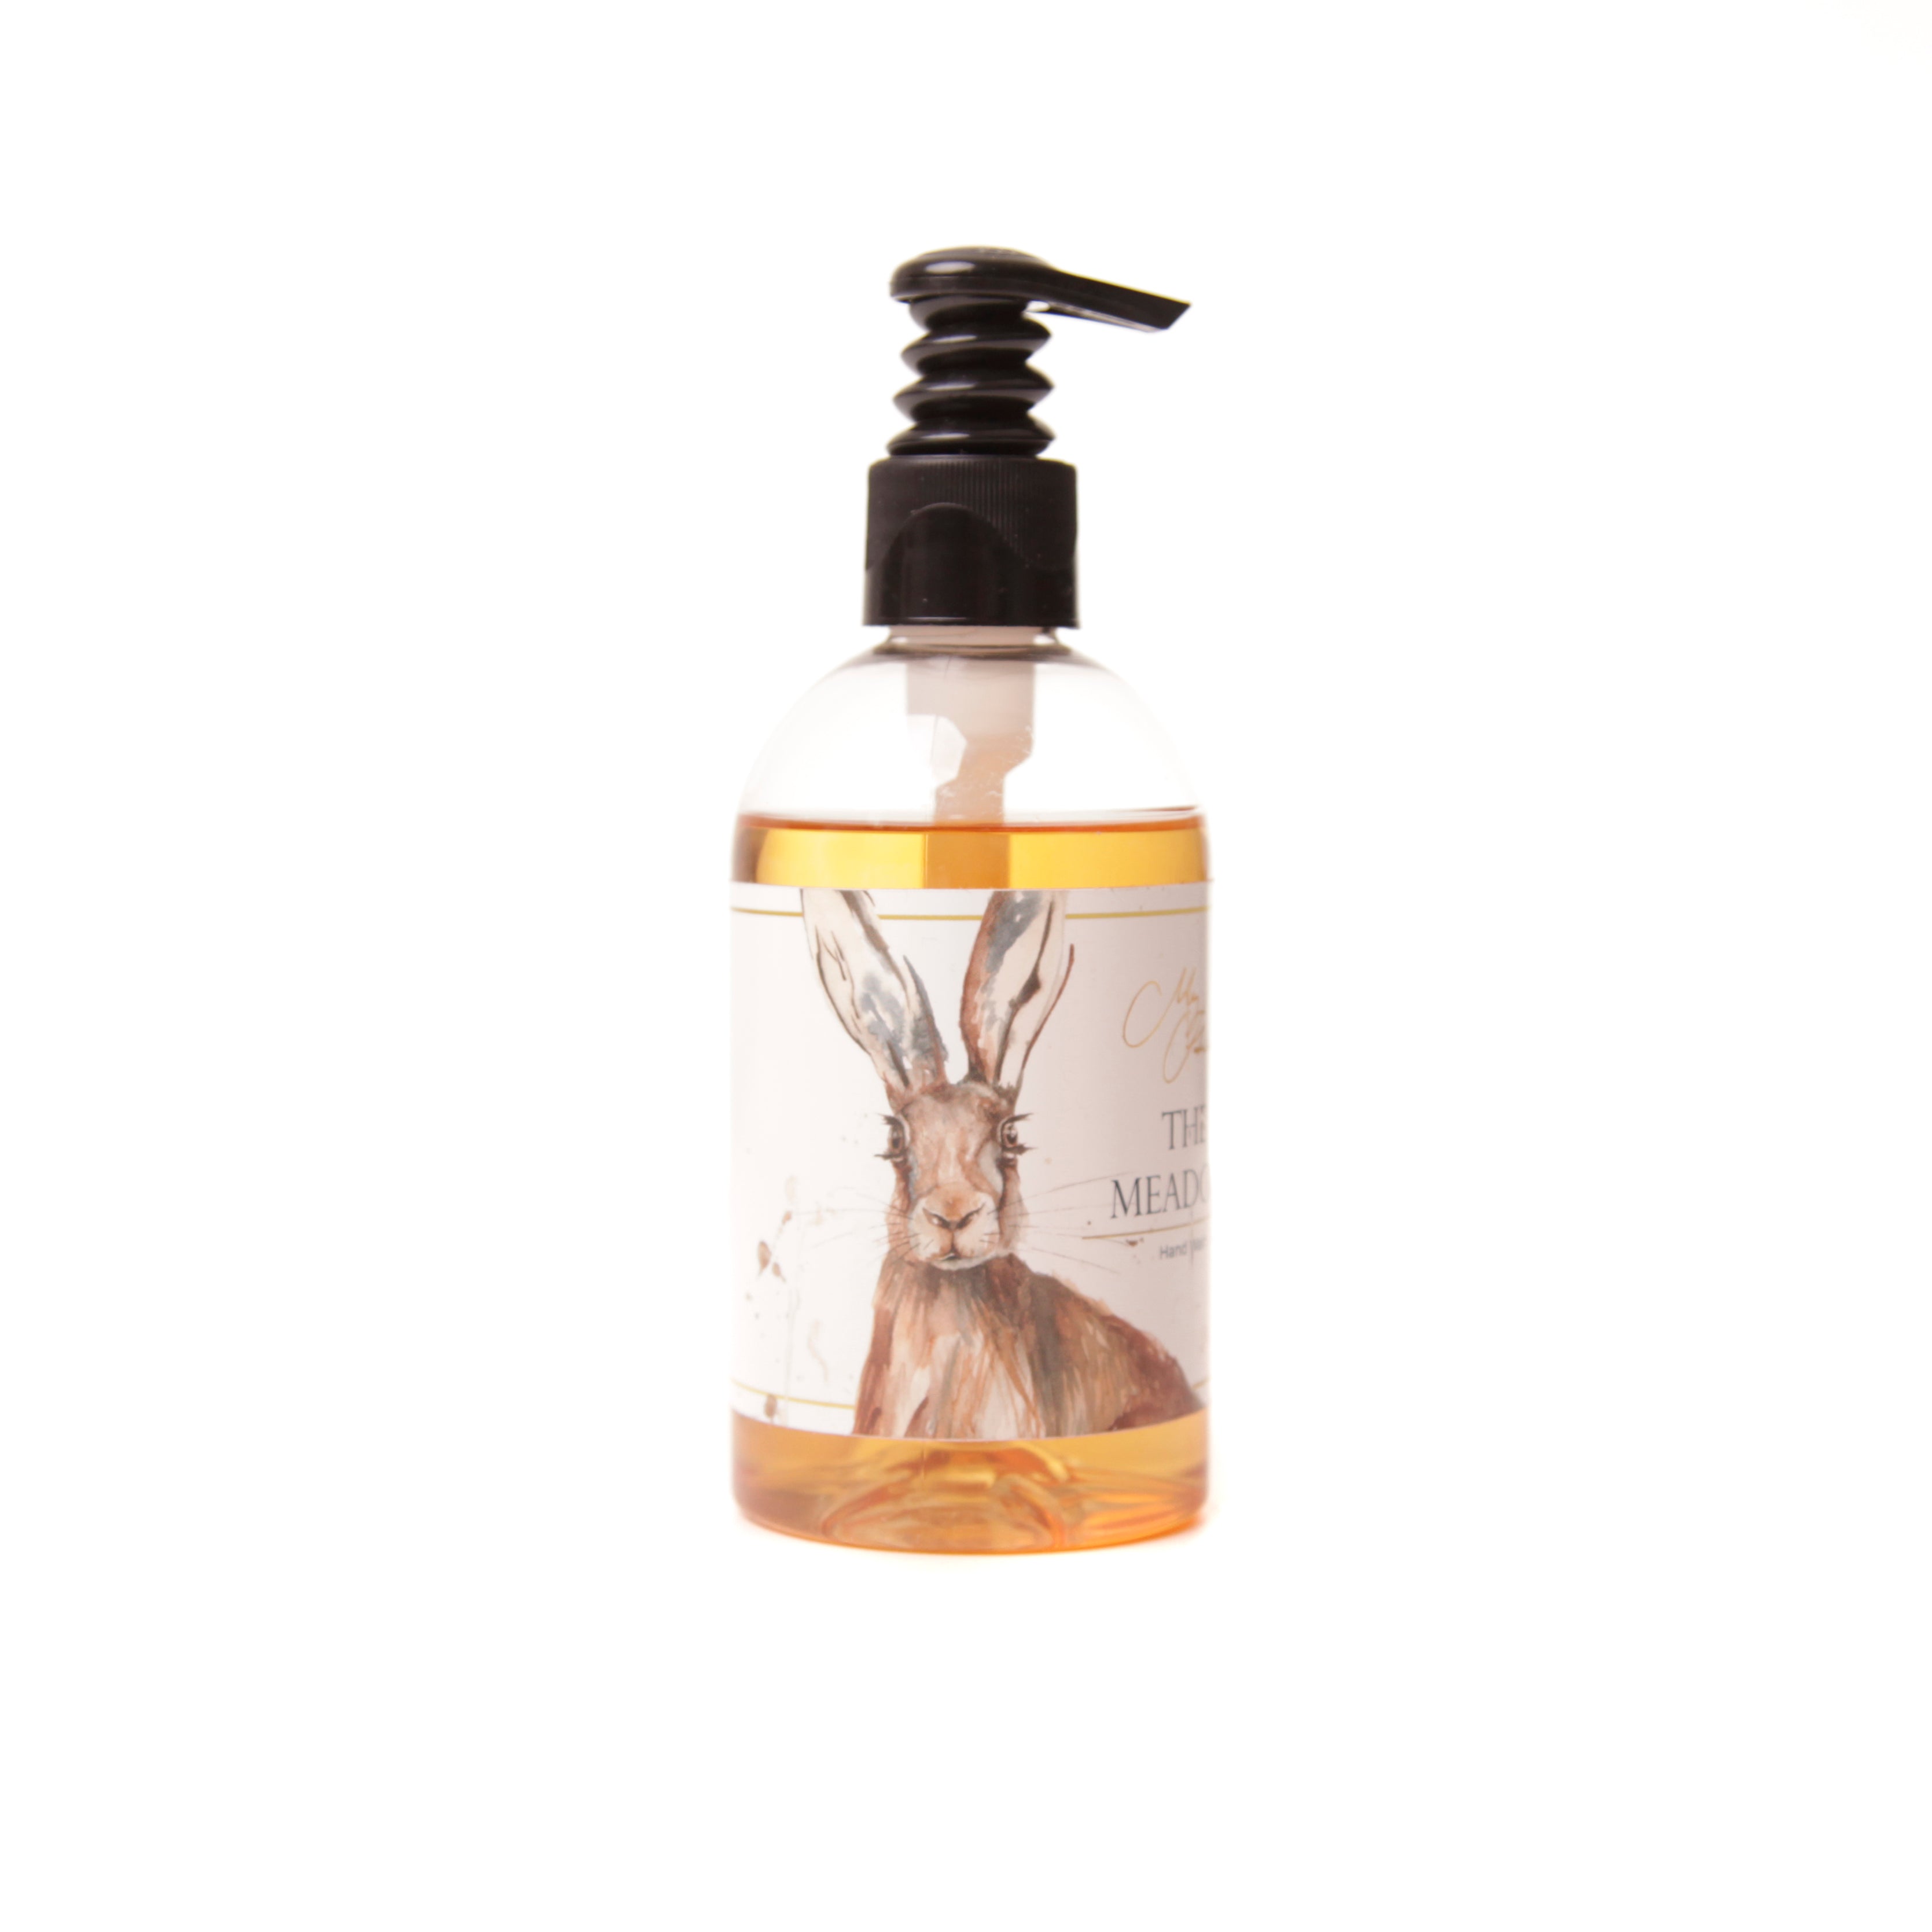 The Meadow Hand Wash with Hare Design